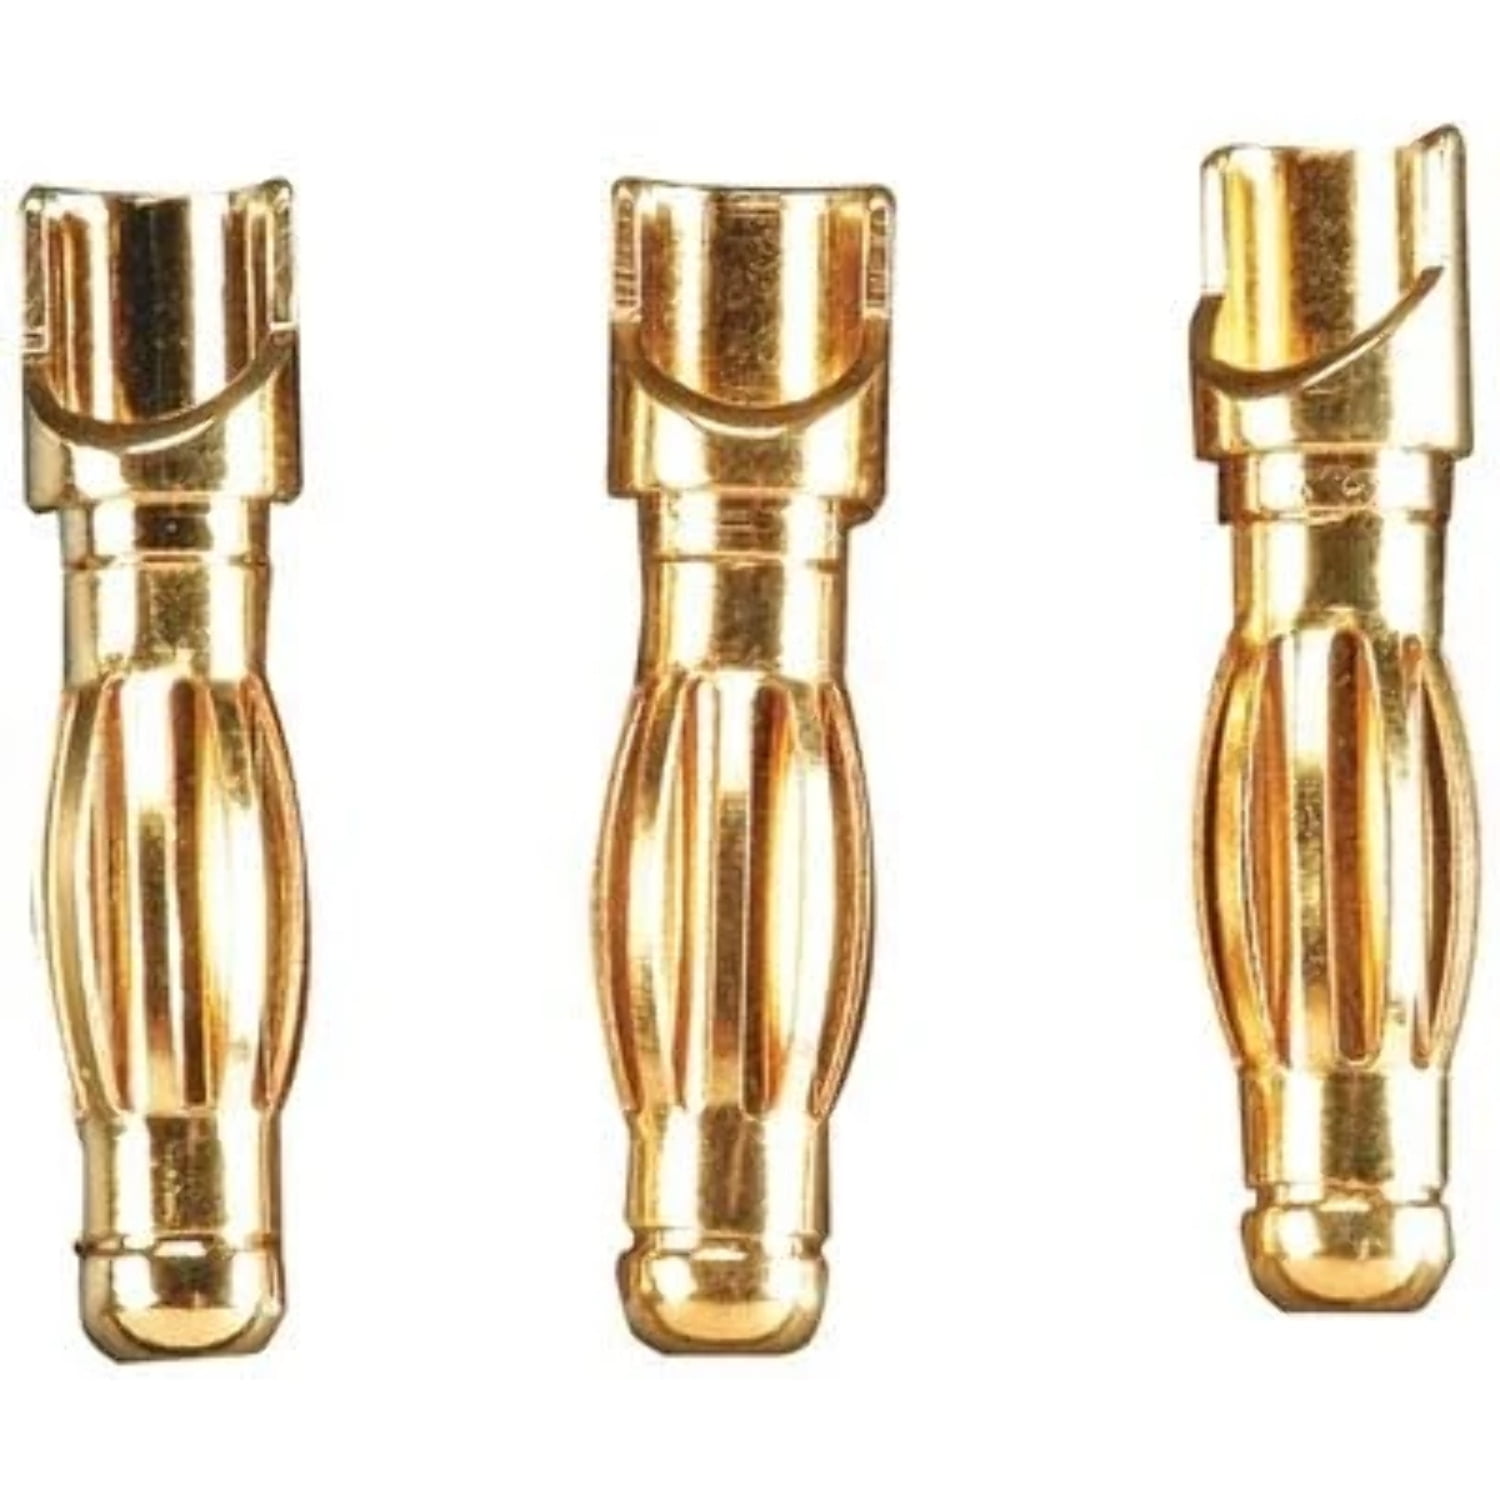 Details about   Duratrax DTXC2306 4mm Male Bullet Connector Gold Plated 2 